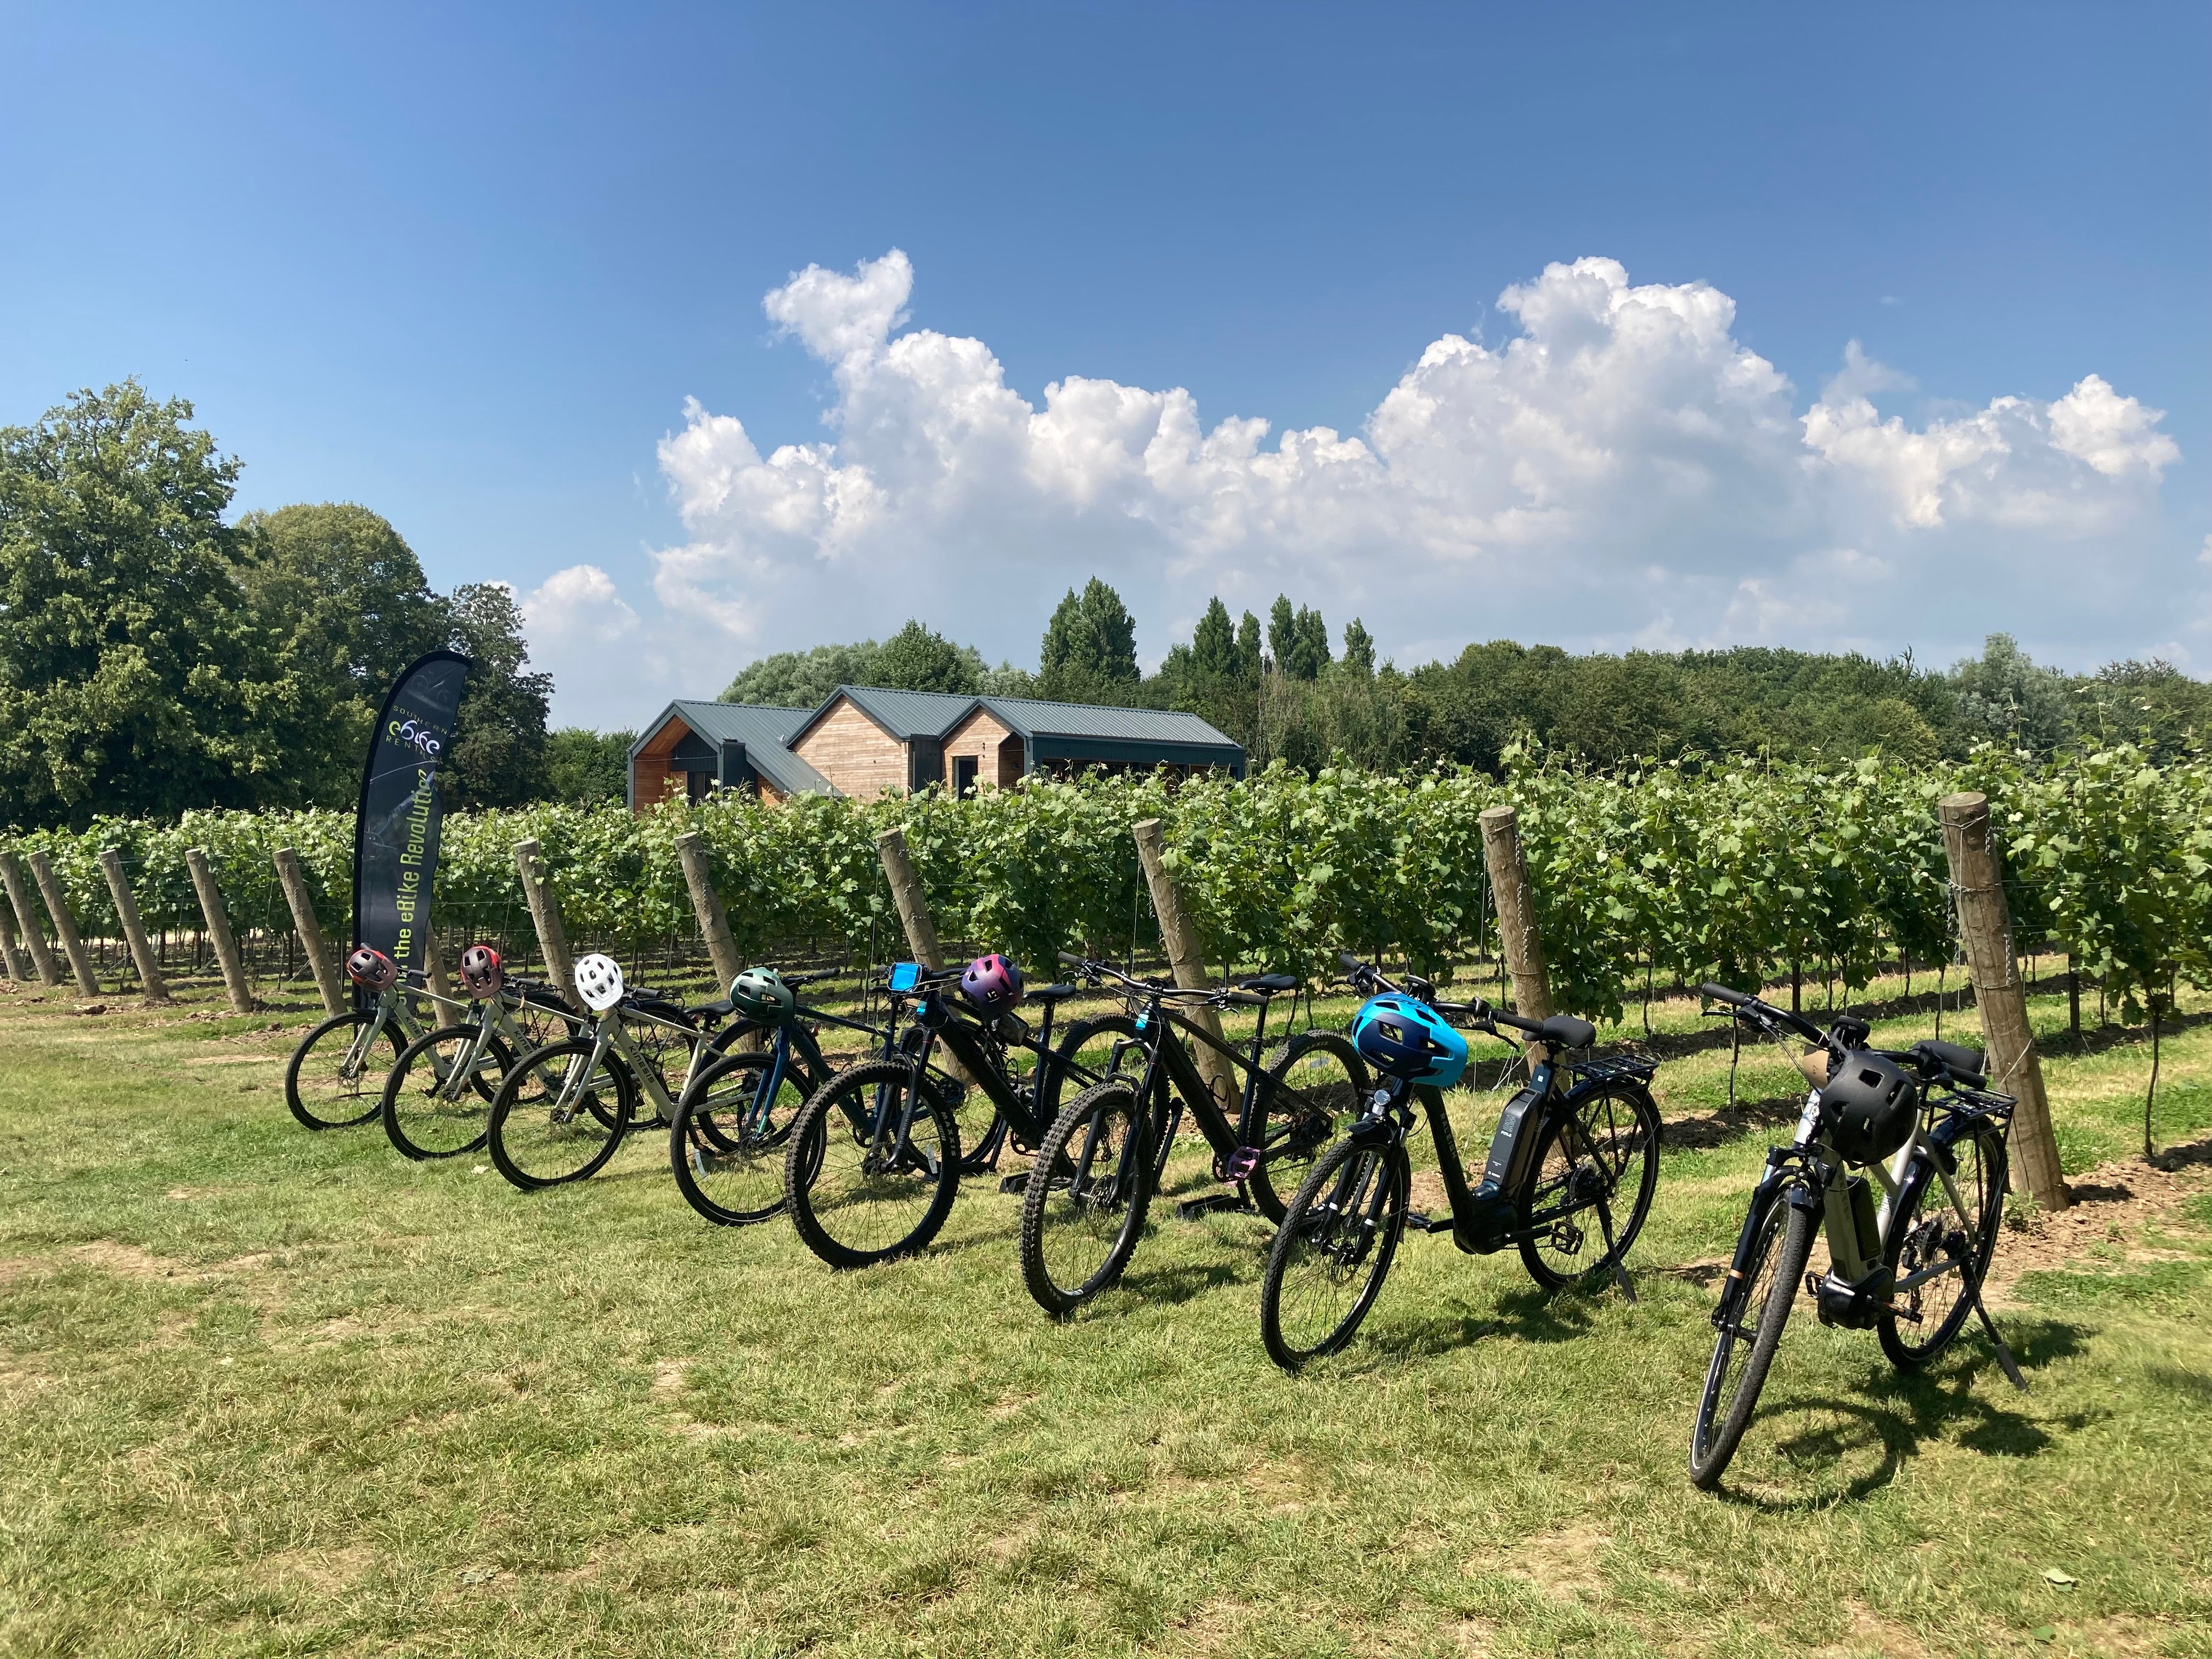 Ebikes are an easy way to explore this wine region